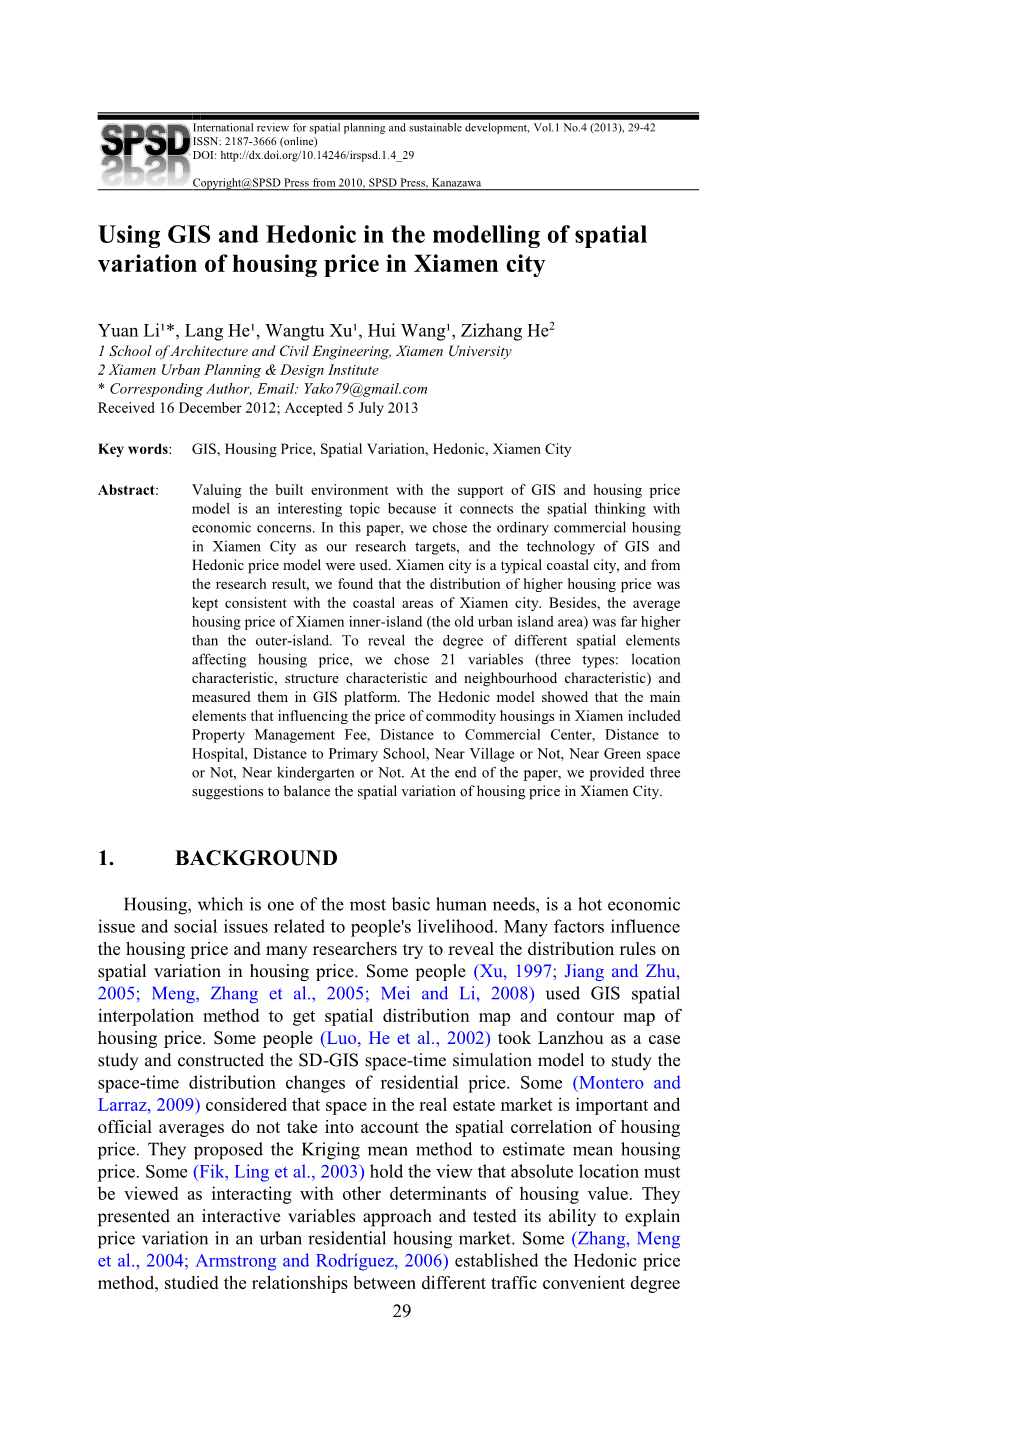 Using GIS and Hedonic in the Modelling of Spatial Variation of Housing Price in Xiamen City